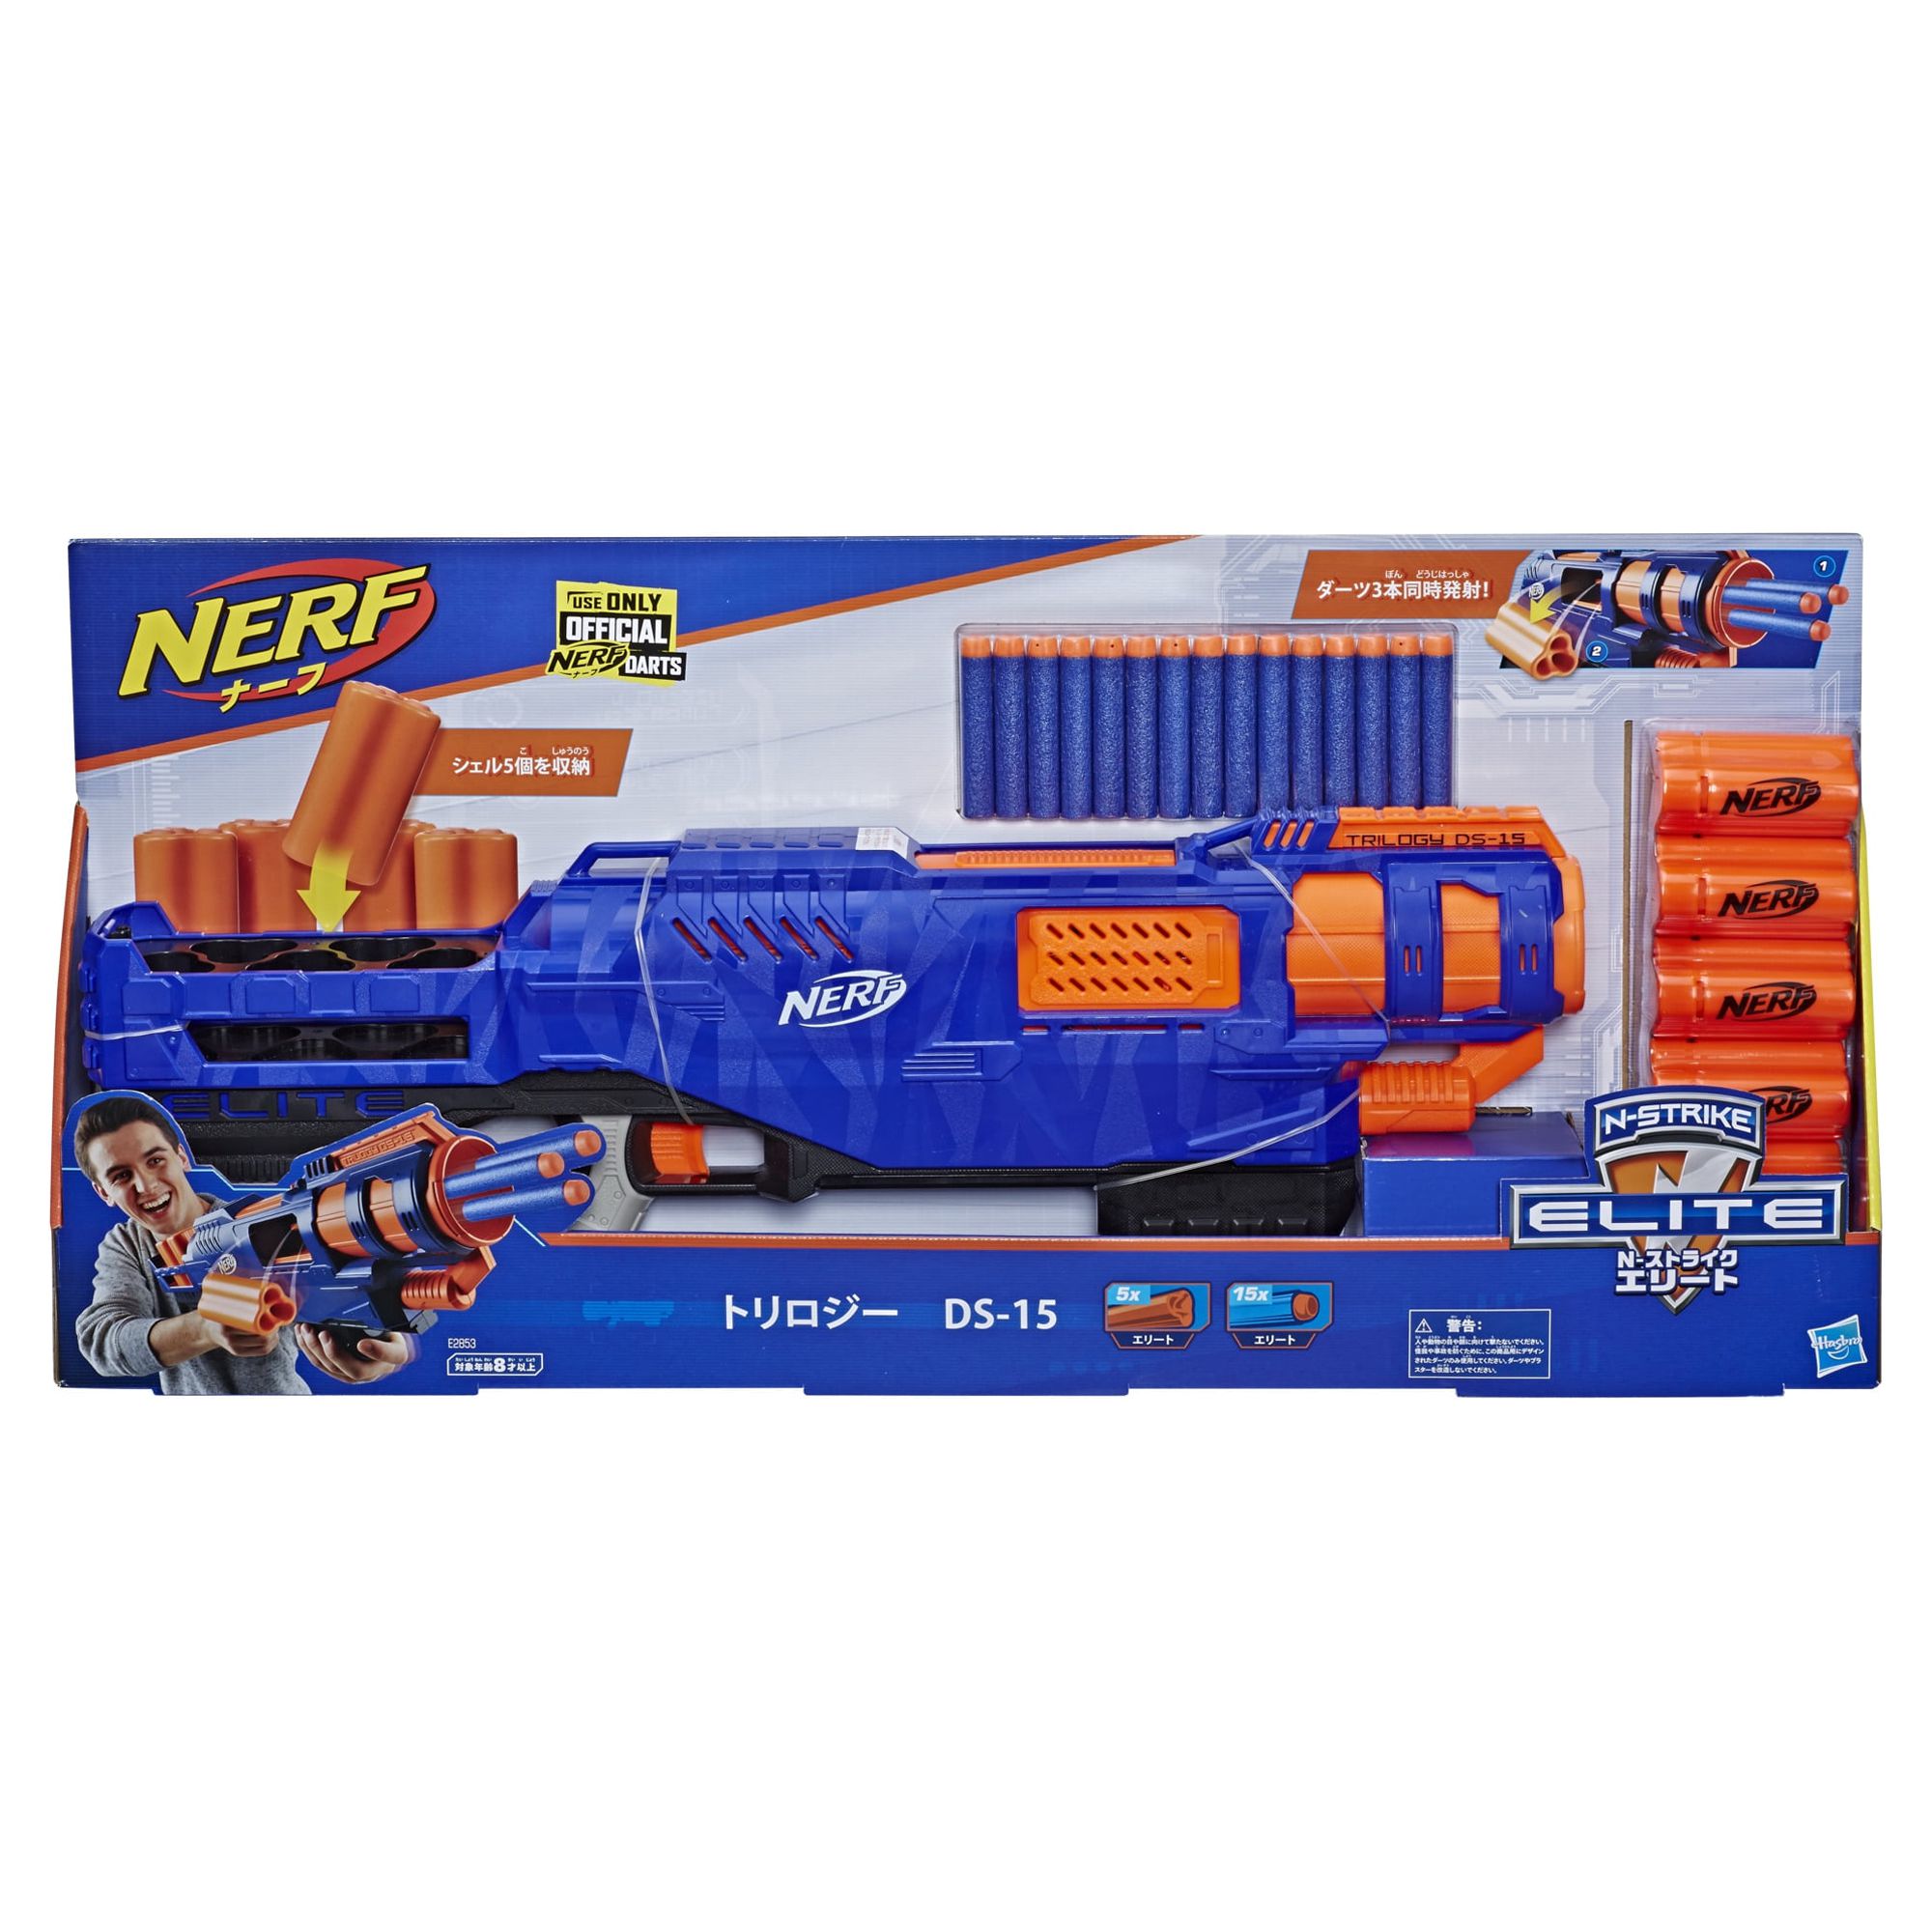 Trilogy DS-15 Nerf N-Strike Elite Toy Blaster with 15 Official Nerf Elite Darts and 5 Shells – For Kids, Teens, Adults - image 1 of 11